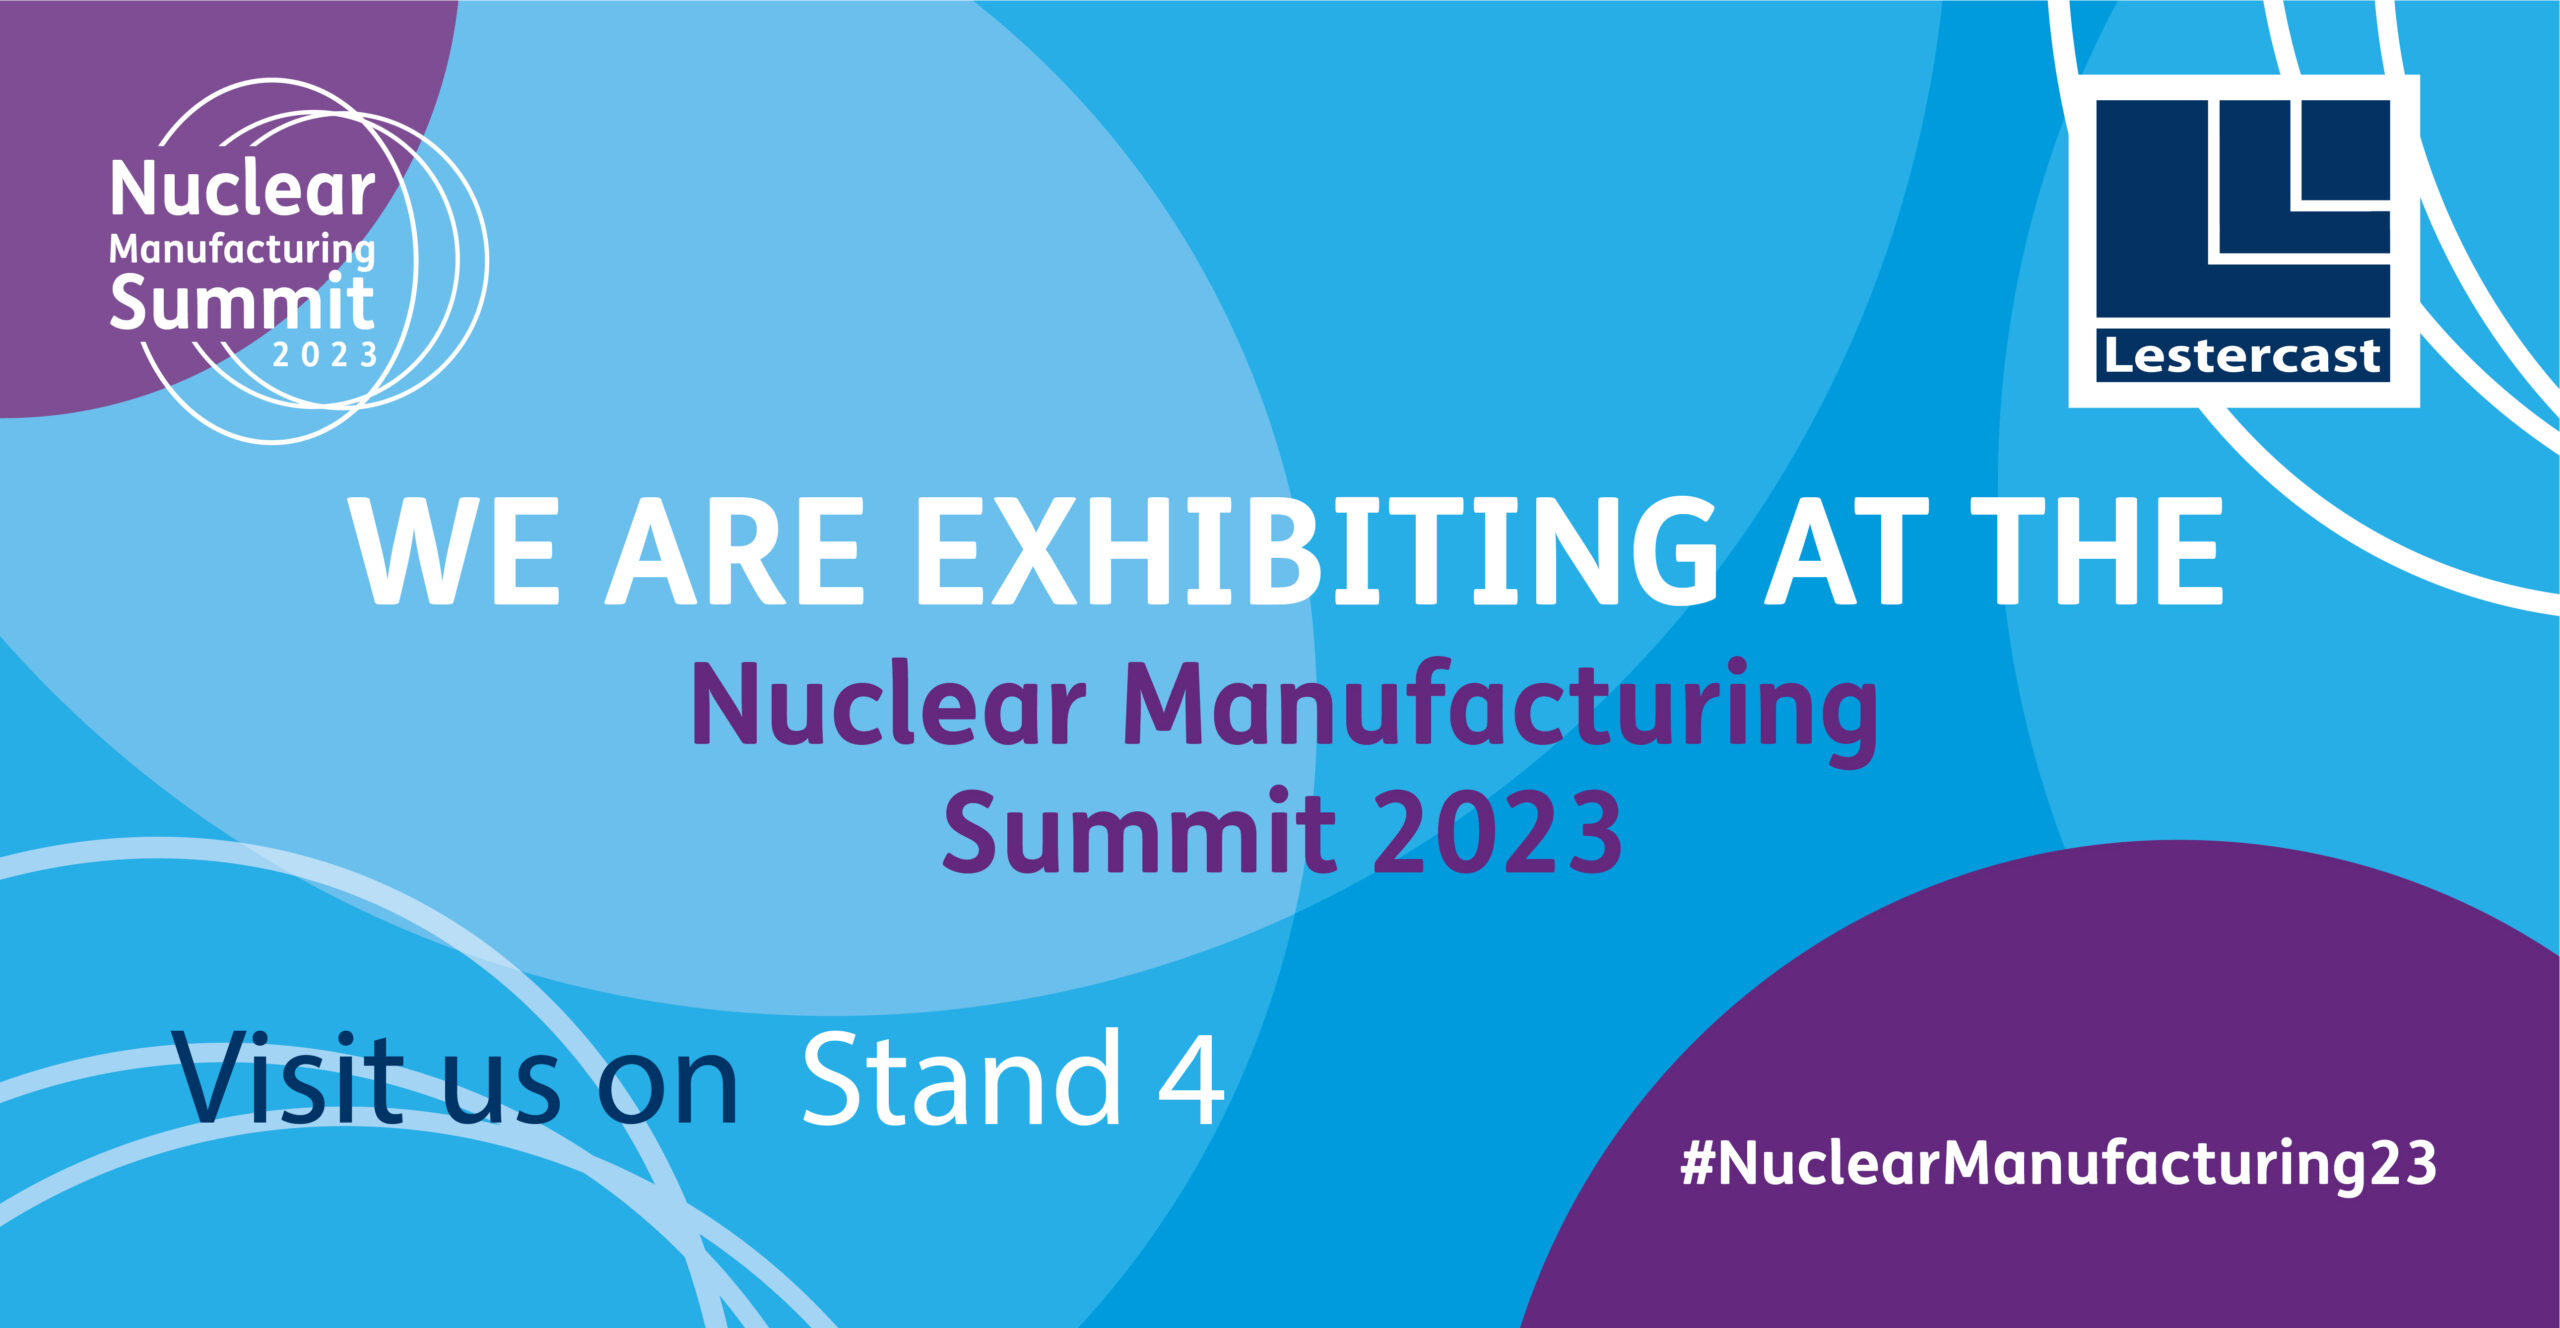 Exhibiting at Nuclear Summit 2023